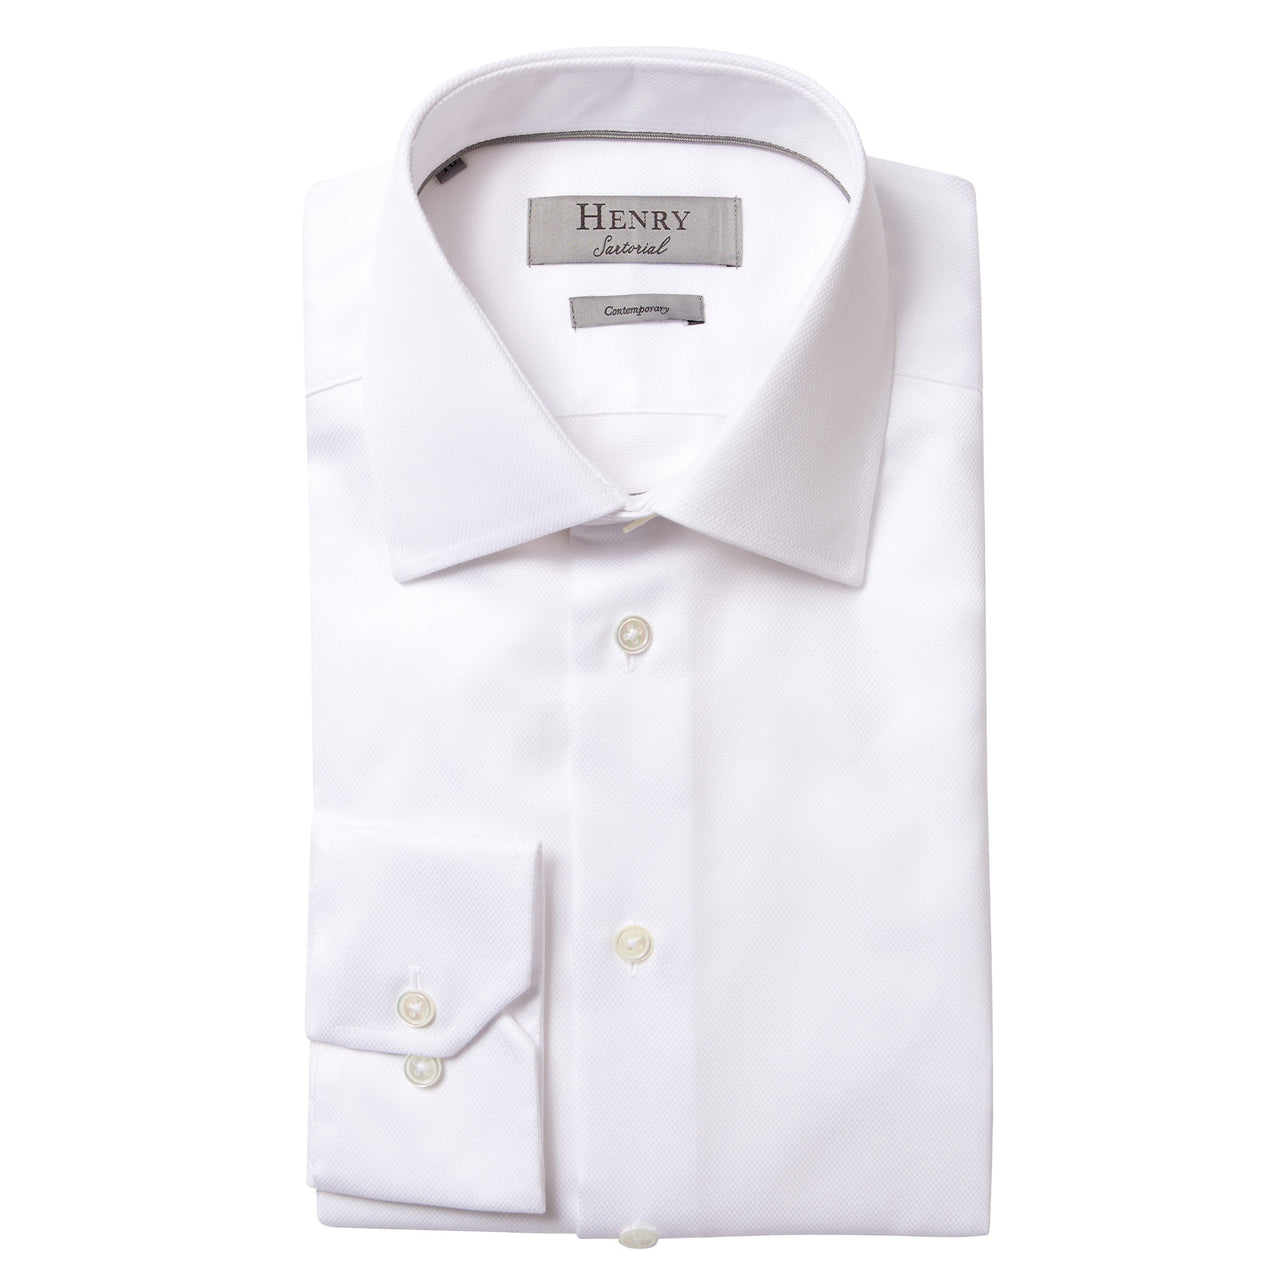 HENRY SARTORIAL Plain Oxford Business Shirt Single Cuff Contemporary Fit WHITE